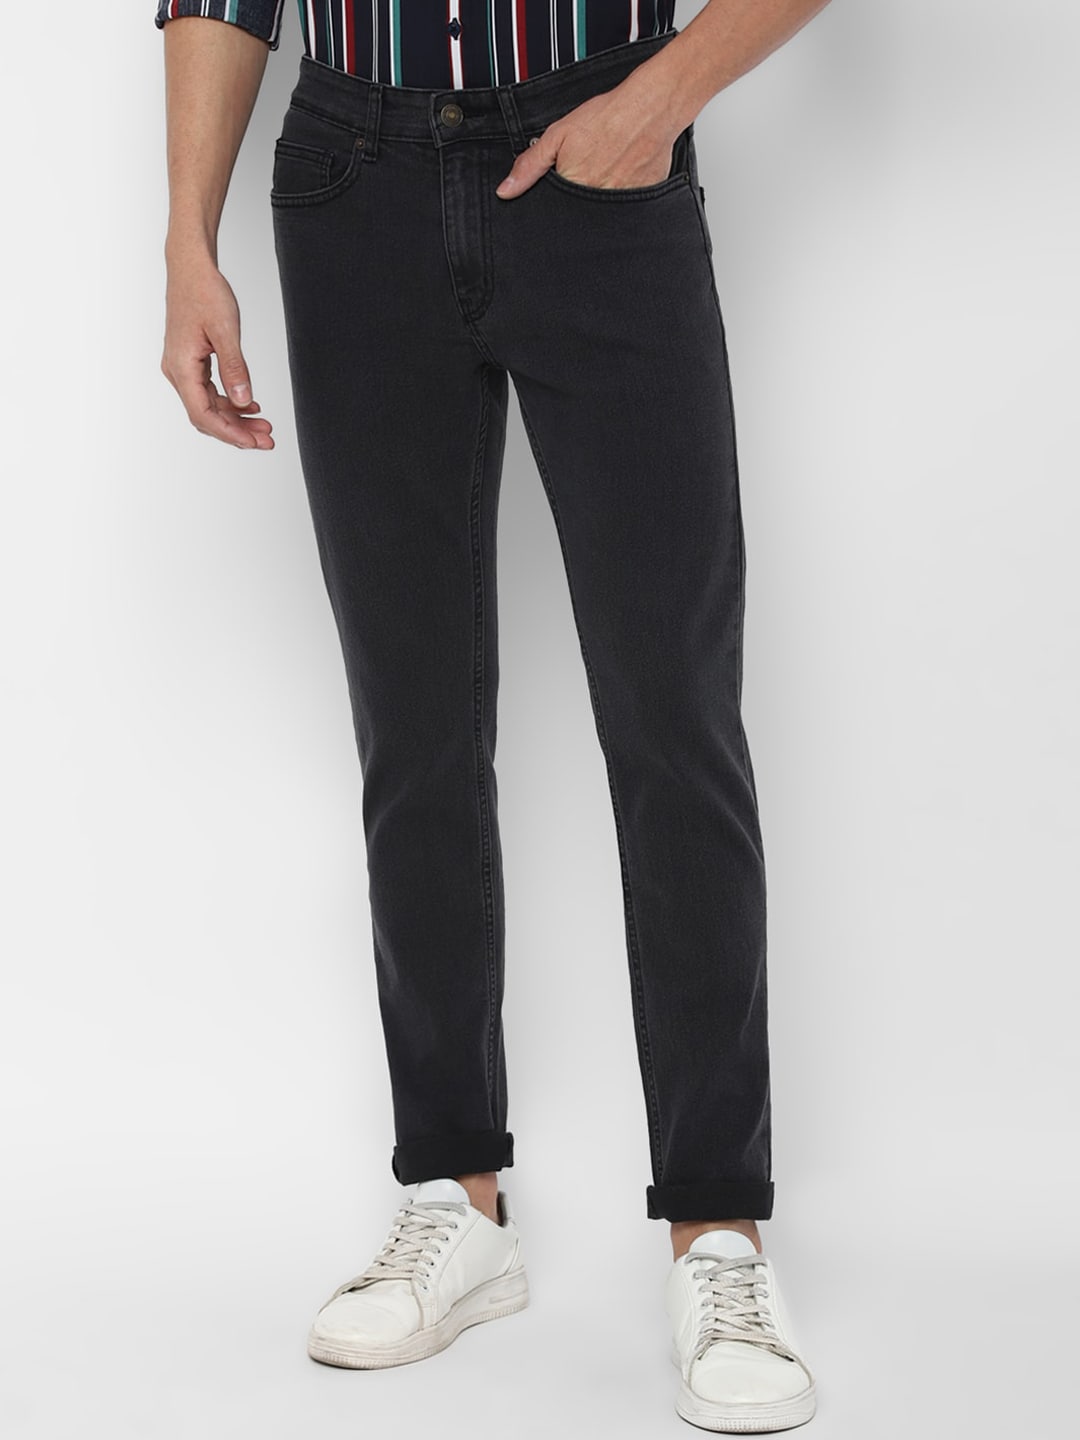 FOREVER 21 Women Charcoal Grey Solid Jeans Price in India